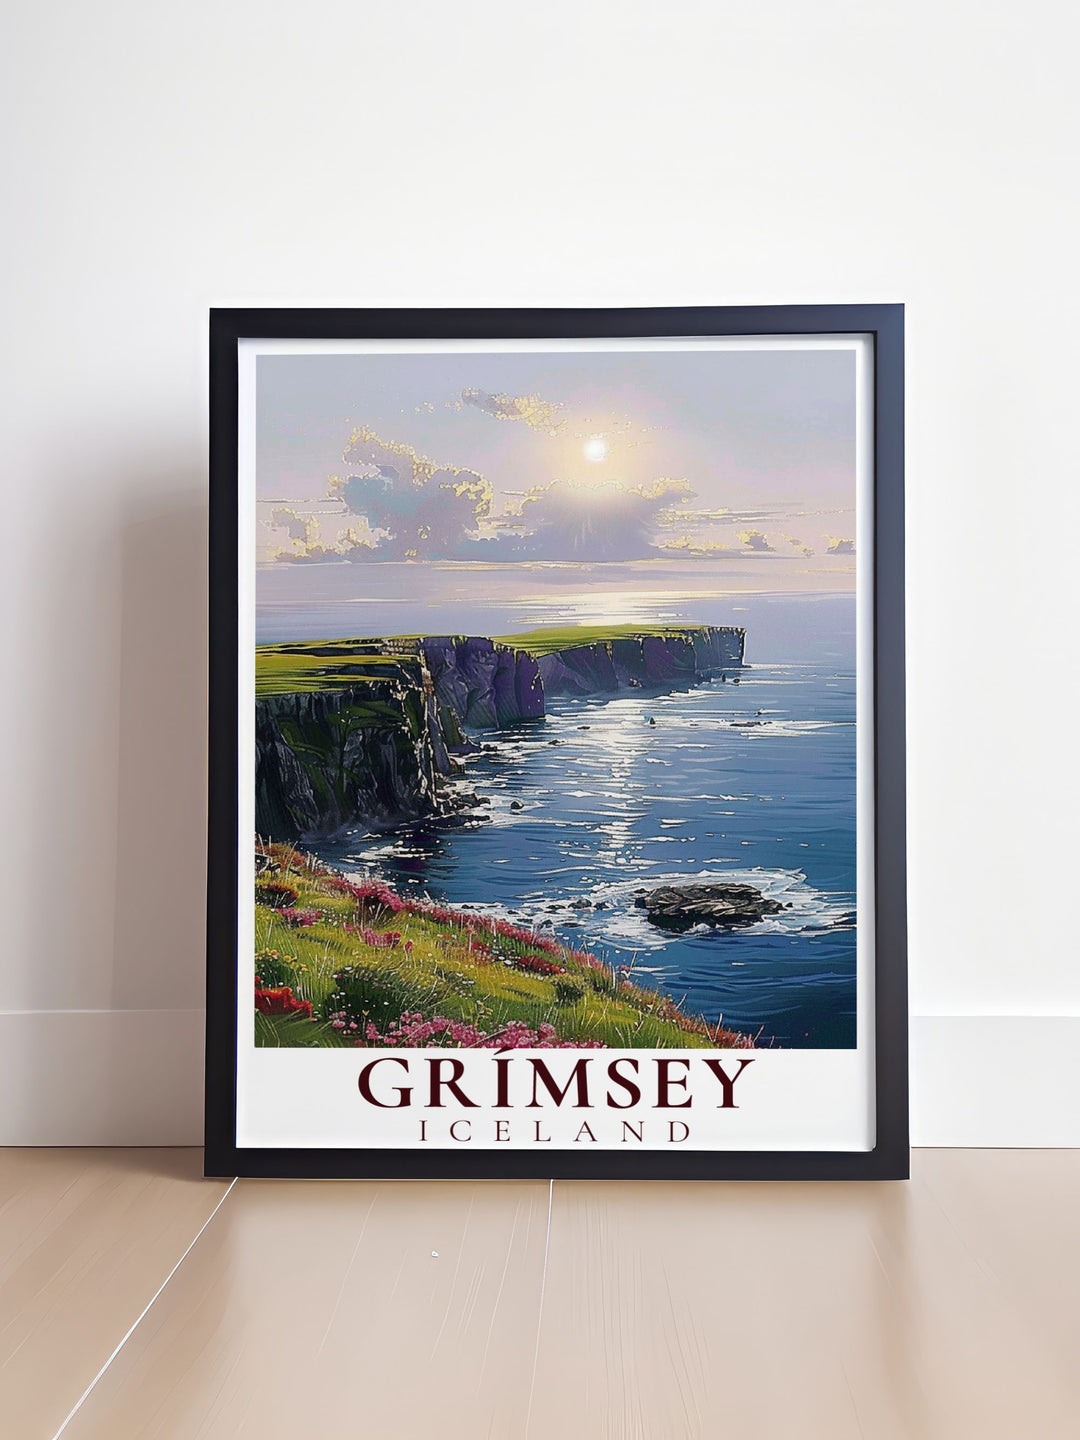 Highlighting the iconic Icelandic puffins on Grimsey Island, this travel poster captures the vibrant wildlife and natural beauty, perfect for nature enthusiasts and bird watchers.